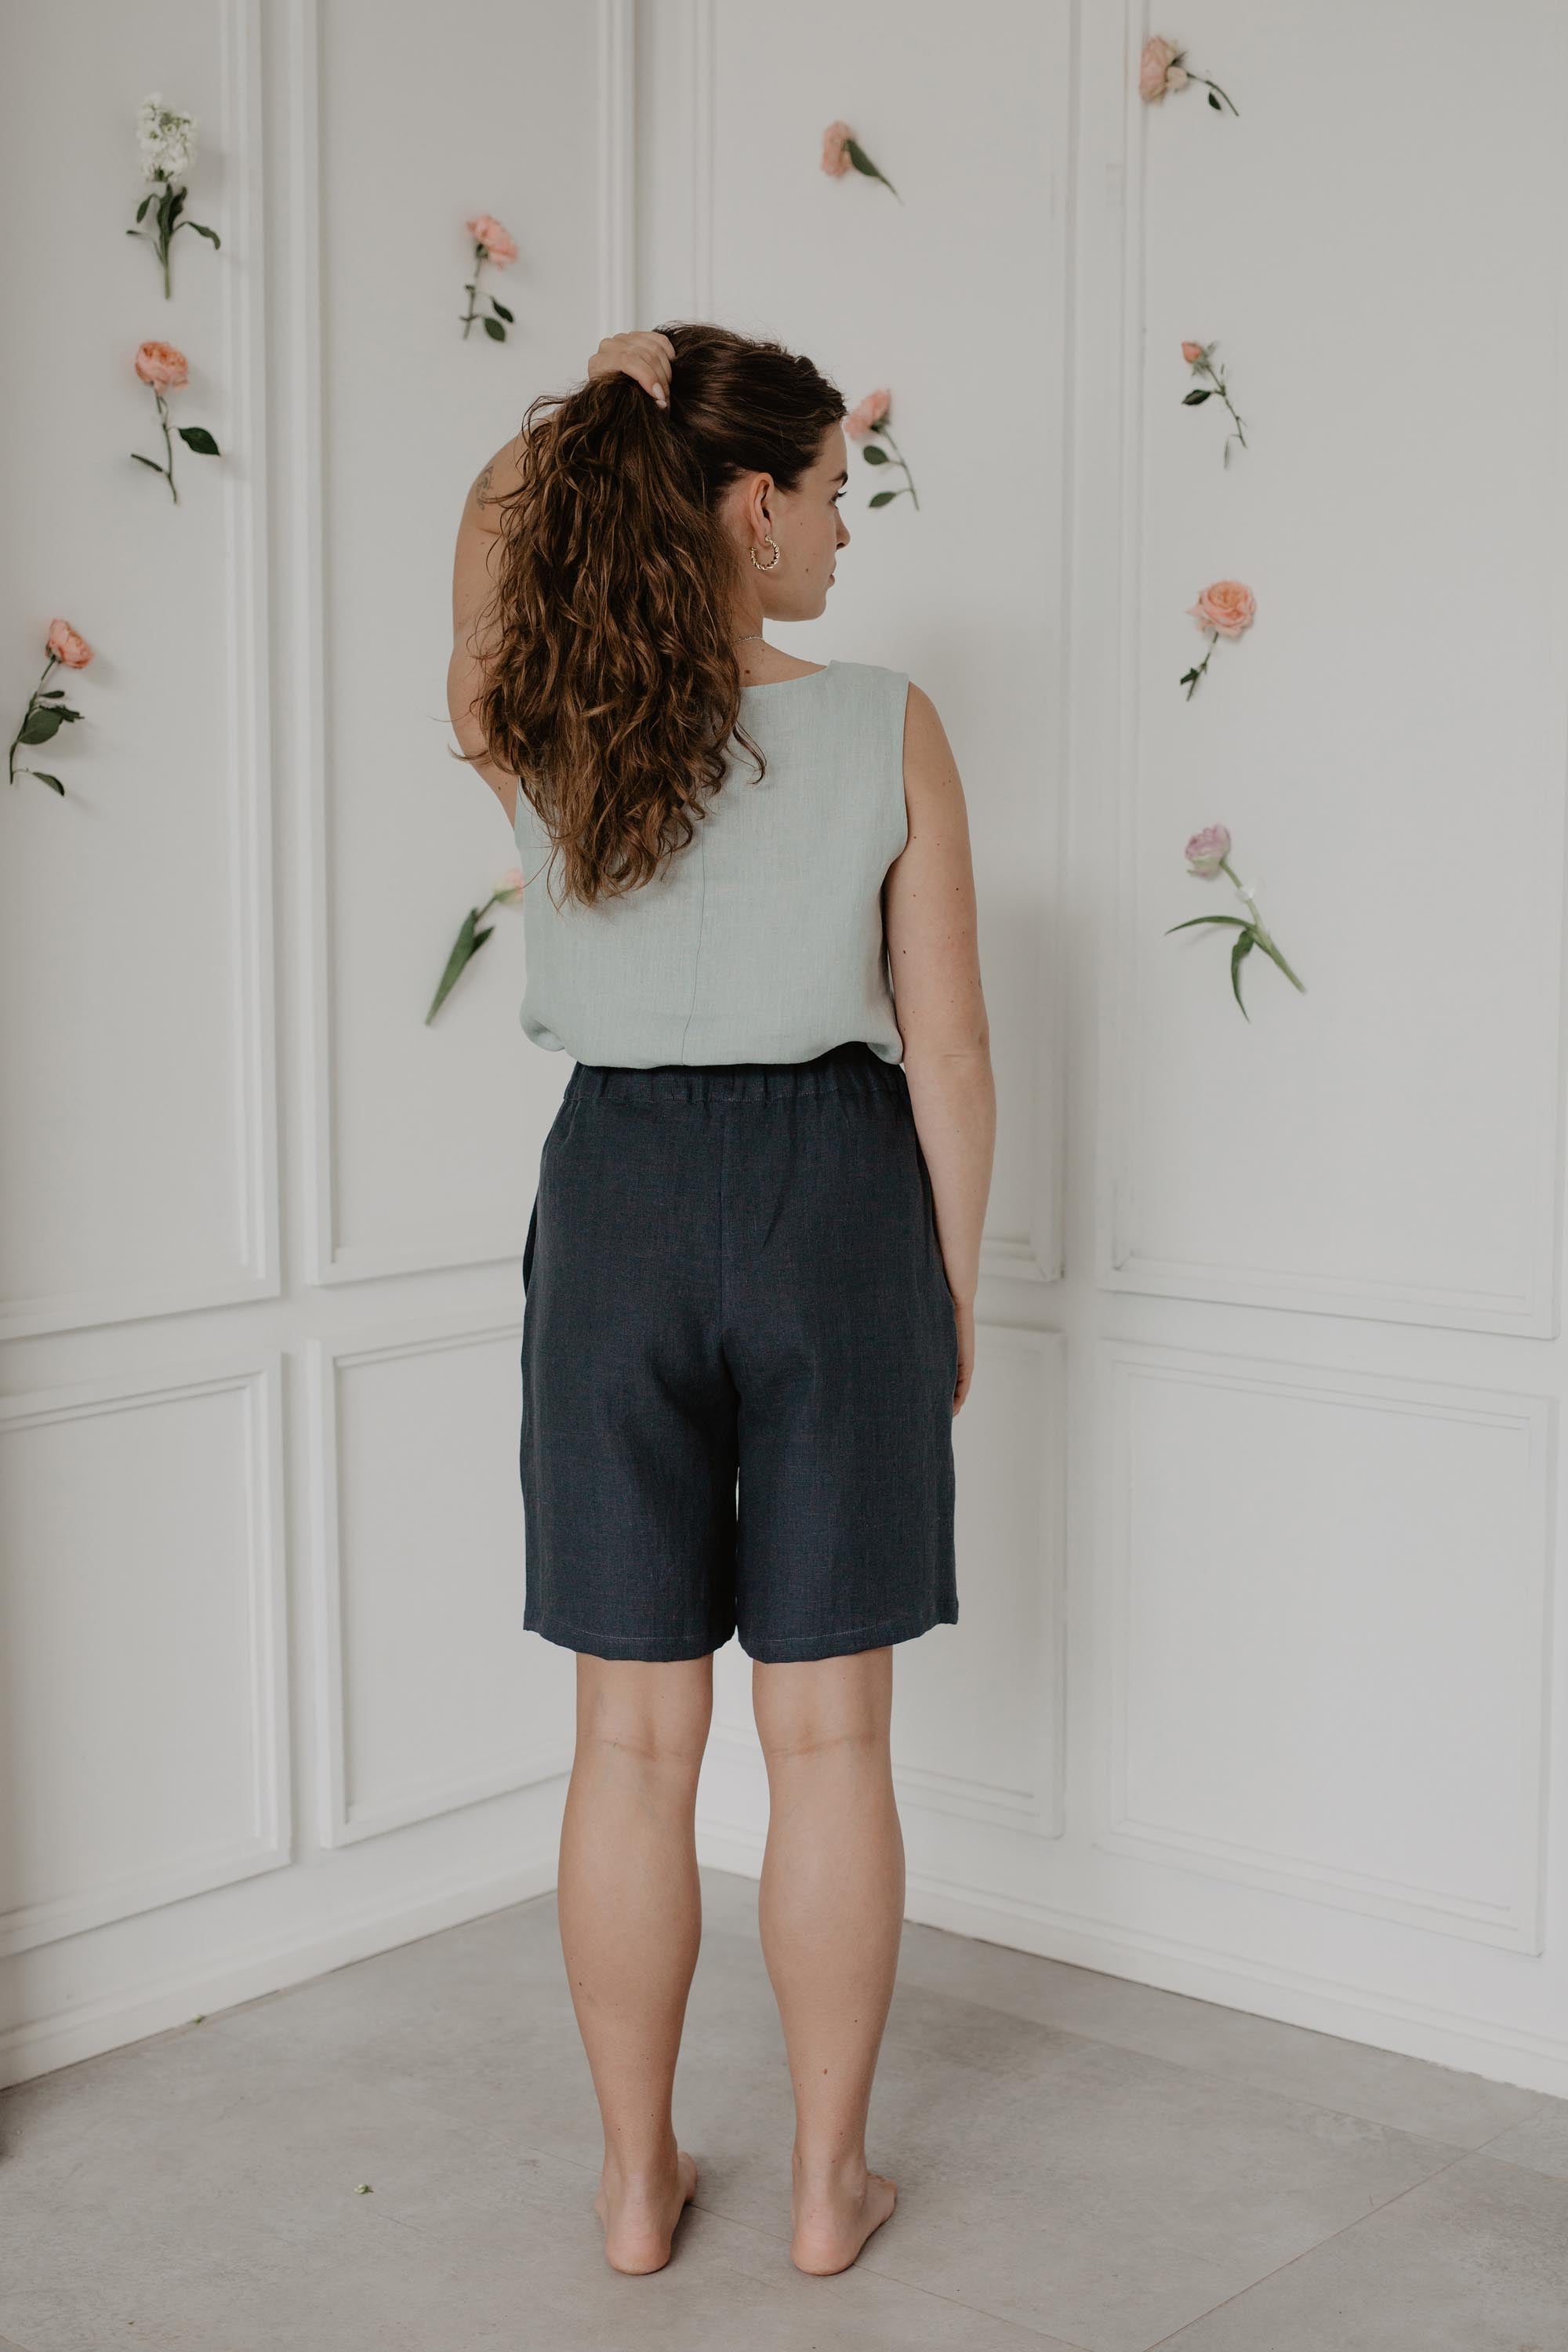 Back Of Woman Wearing Dark Linen Shorts And Sage Green Top In A Light Flowery Room